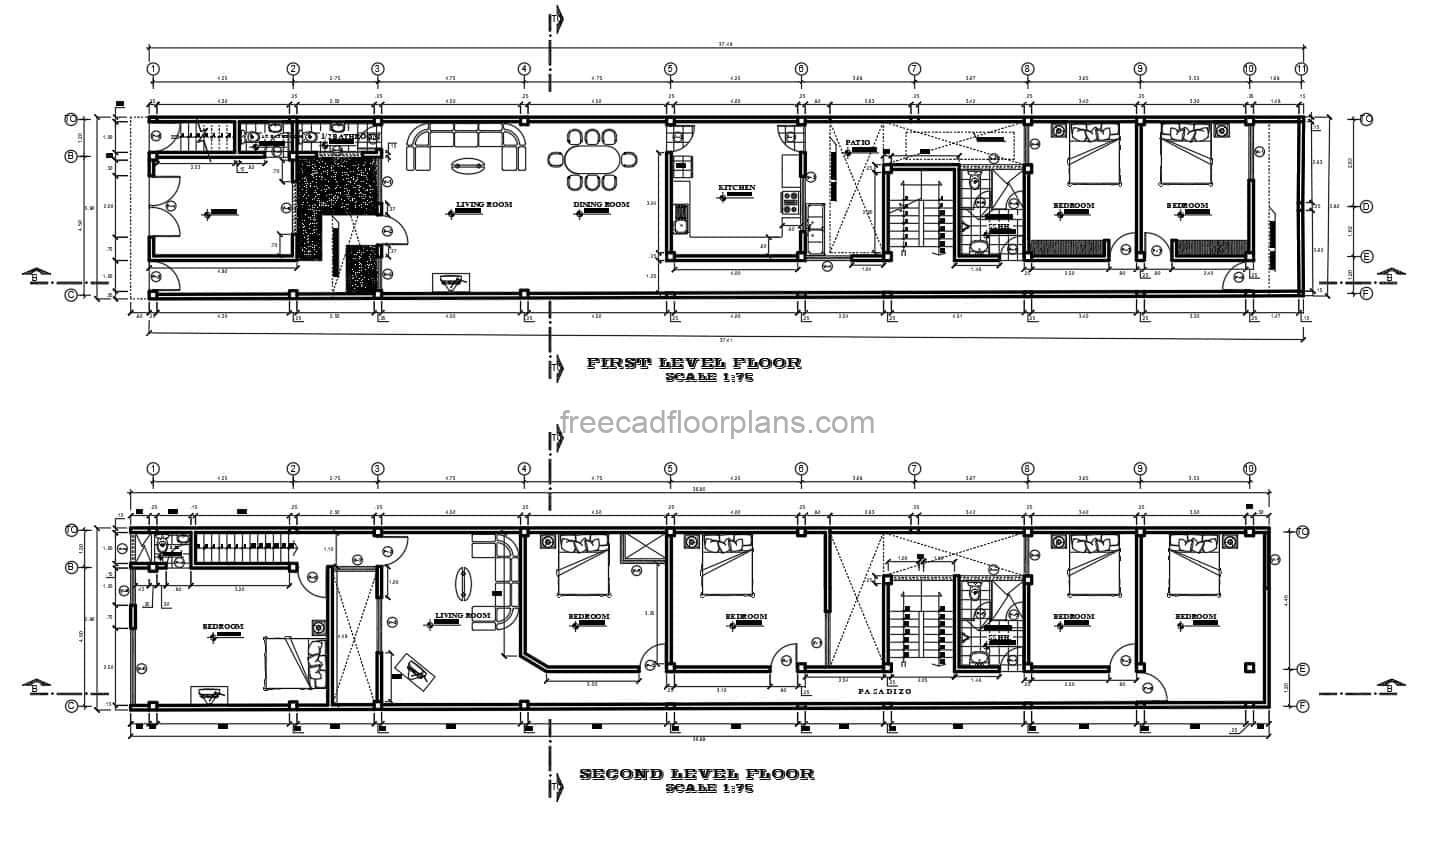 complete architectural project in autocad dwg drawings of a two level residence with seven rooms in total, architectural plans, dimensioned, elevations, sections and technical drawings with foundations, sanitary, electrical, structural. Project in dwg drawings for free download